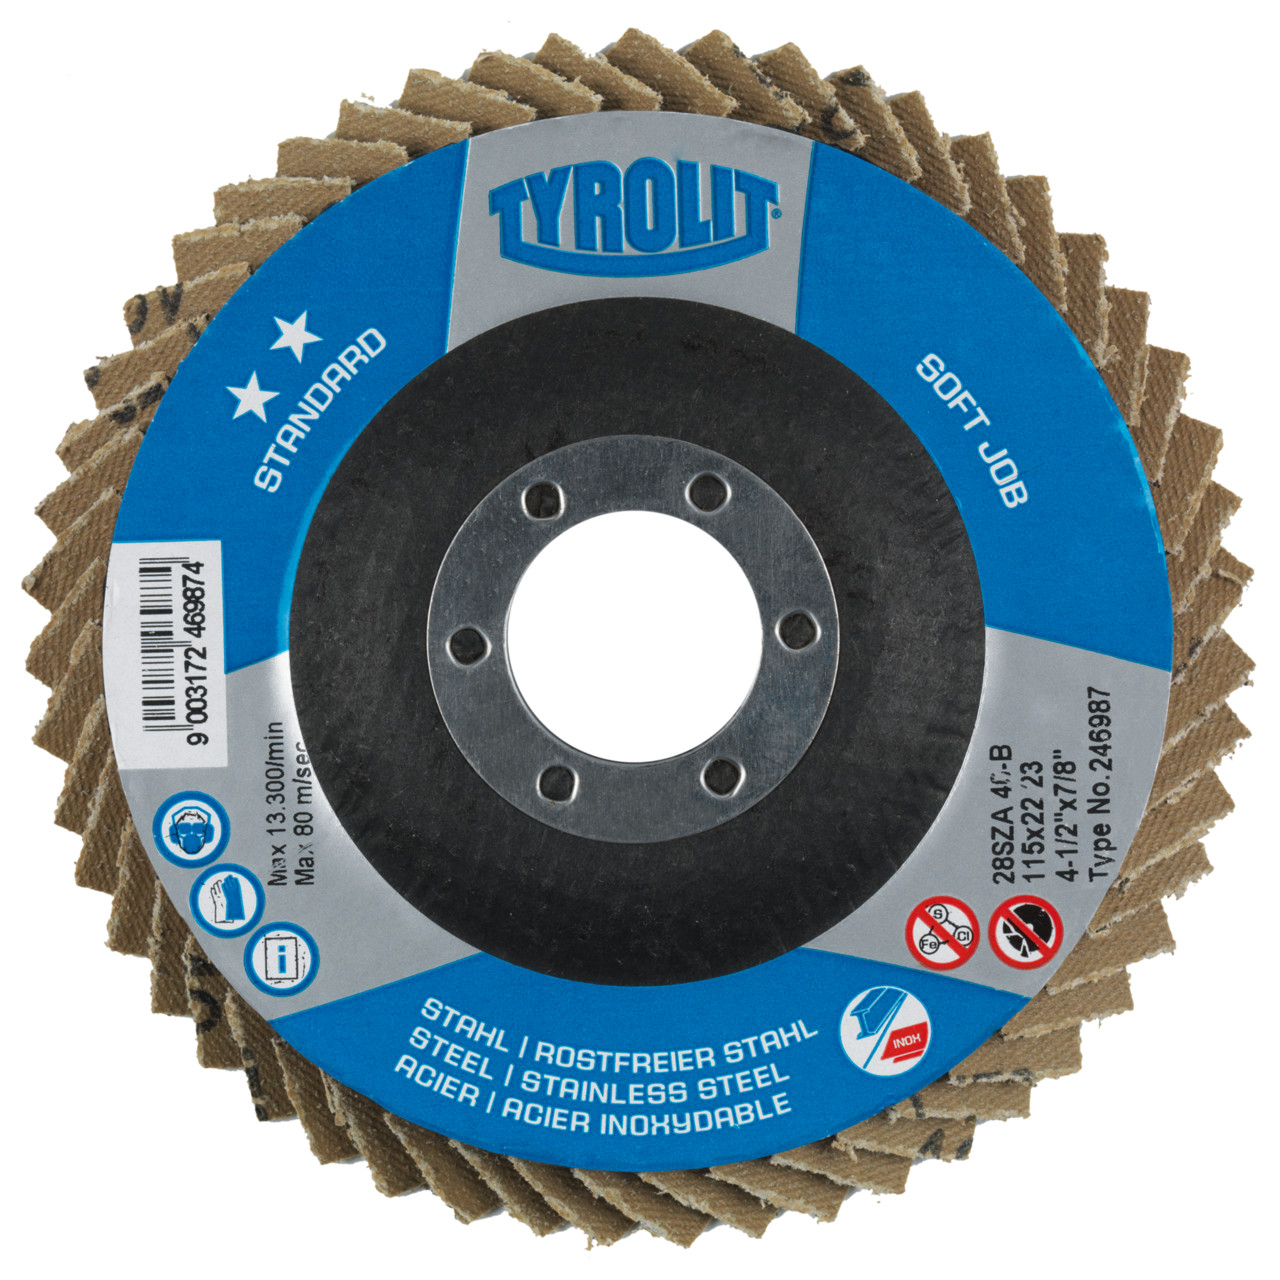 Tyrolit SOFTJOB DxH 125x22.23 2in1 for steel and stainless steel, P120, shape: 28S - straight version (SOFTJOB serrated lock washer), Art. 247001